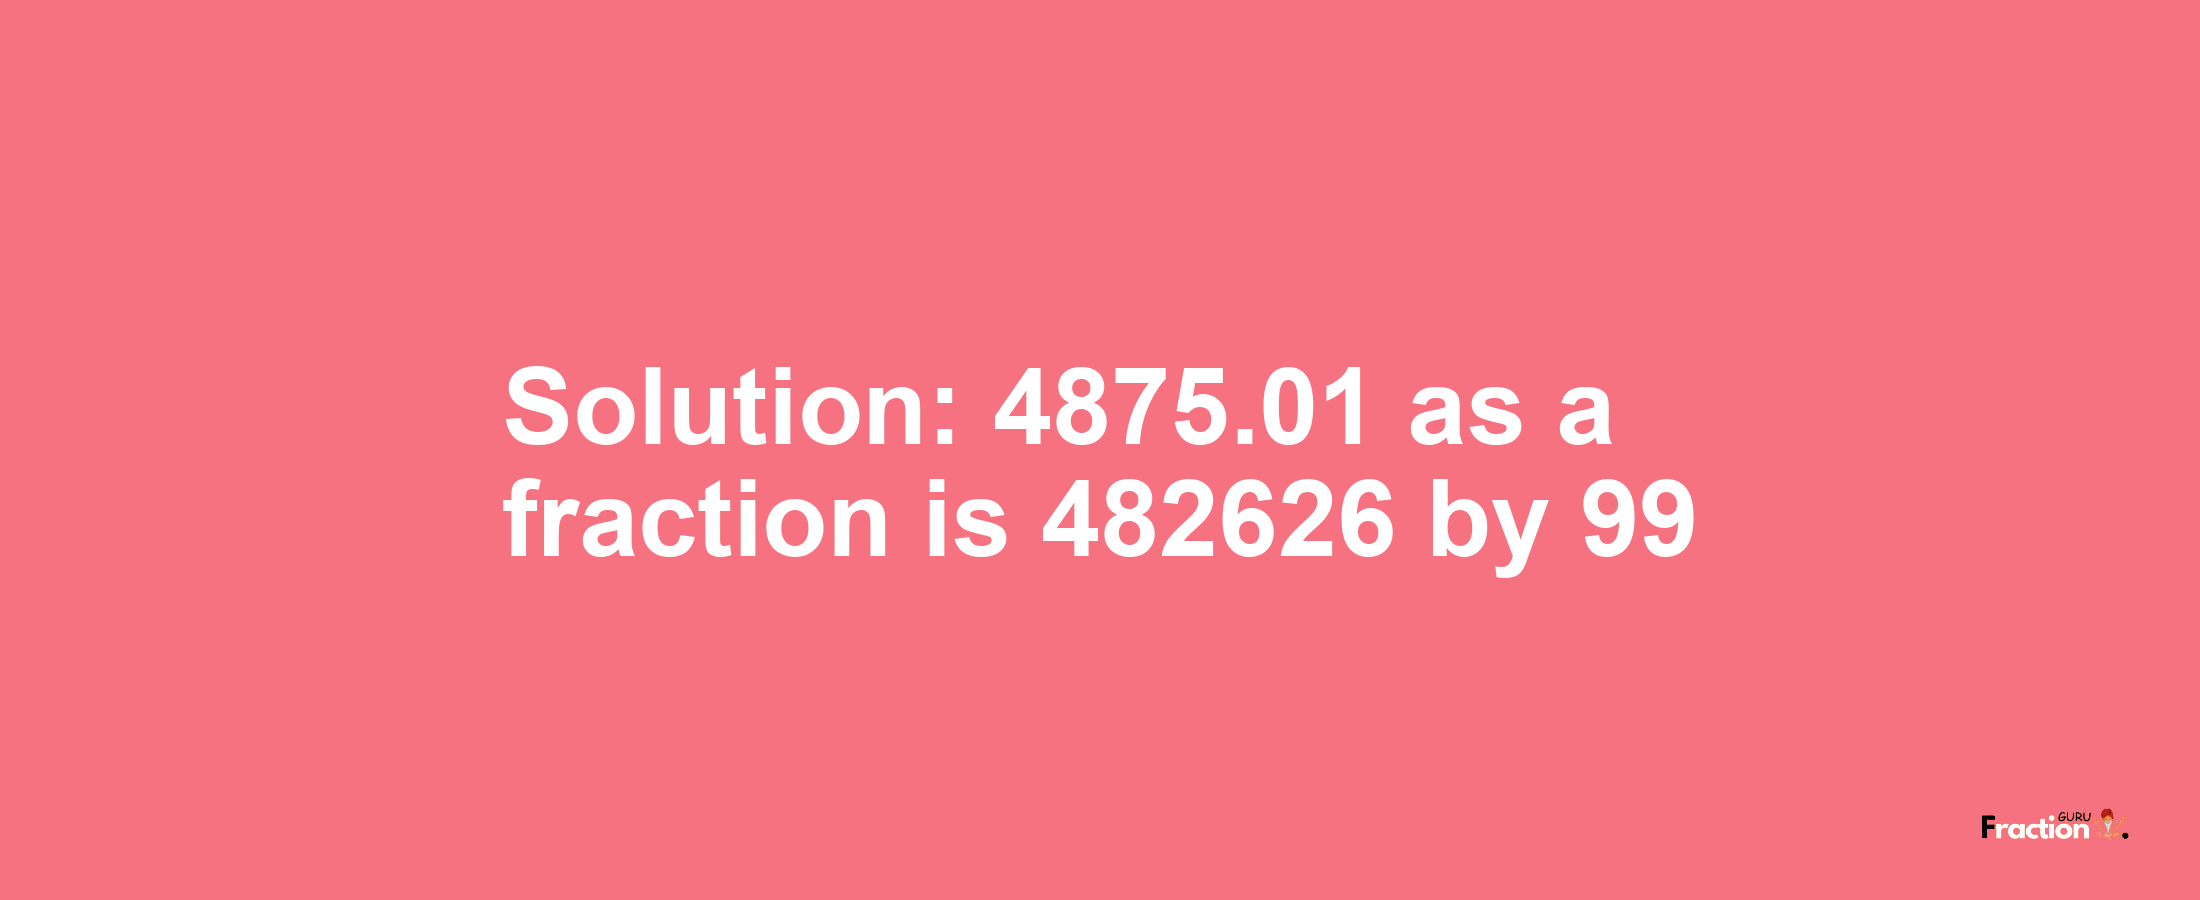 Solution:4875.01 as a fraction is 482626/99